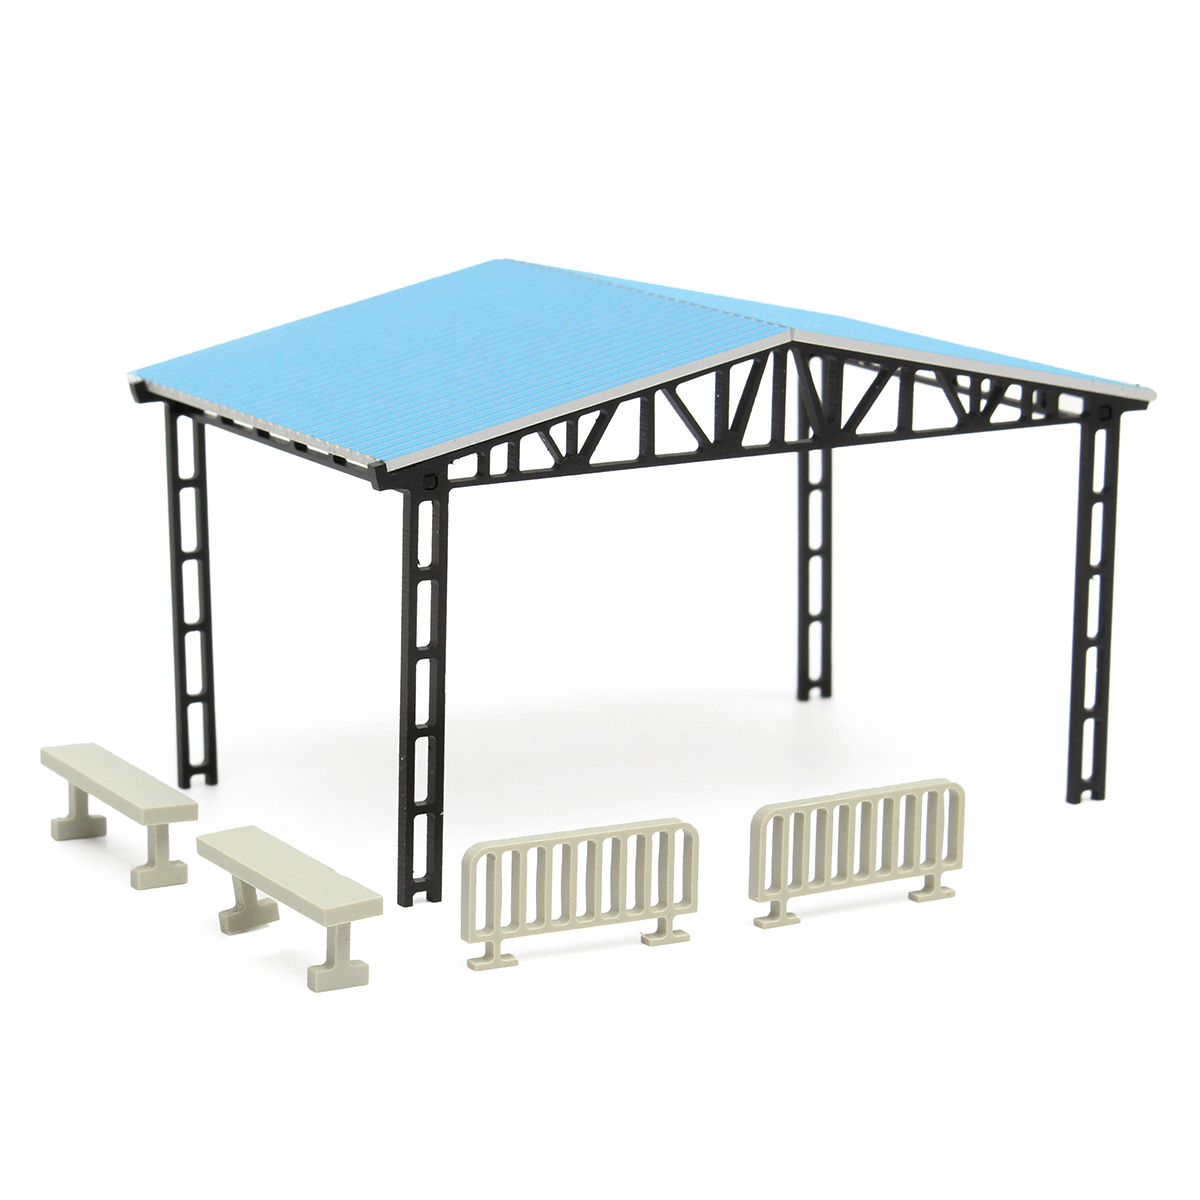 Model-Layout-Building-Parking-Shed-With-2-Fences-2-Benches-HO-Scale-187-Kit-1093333-1